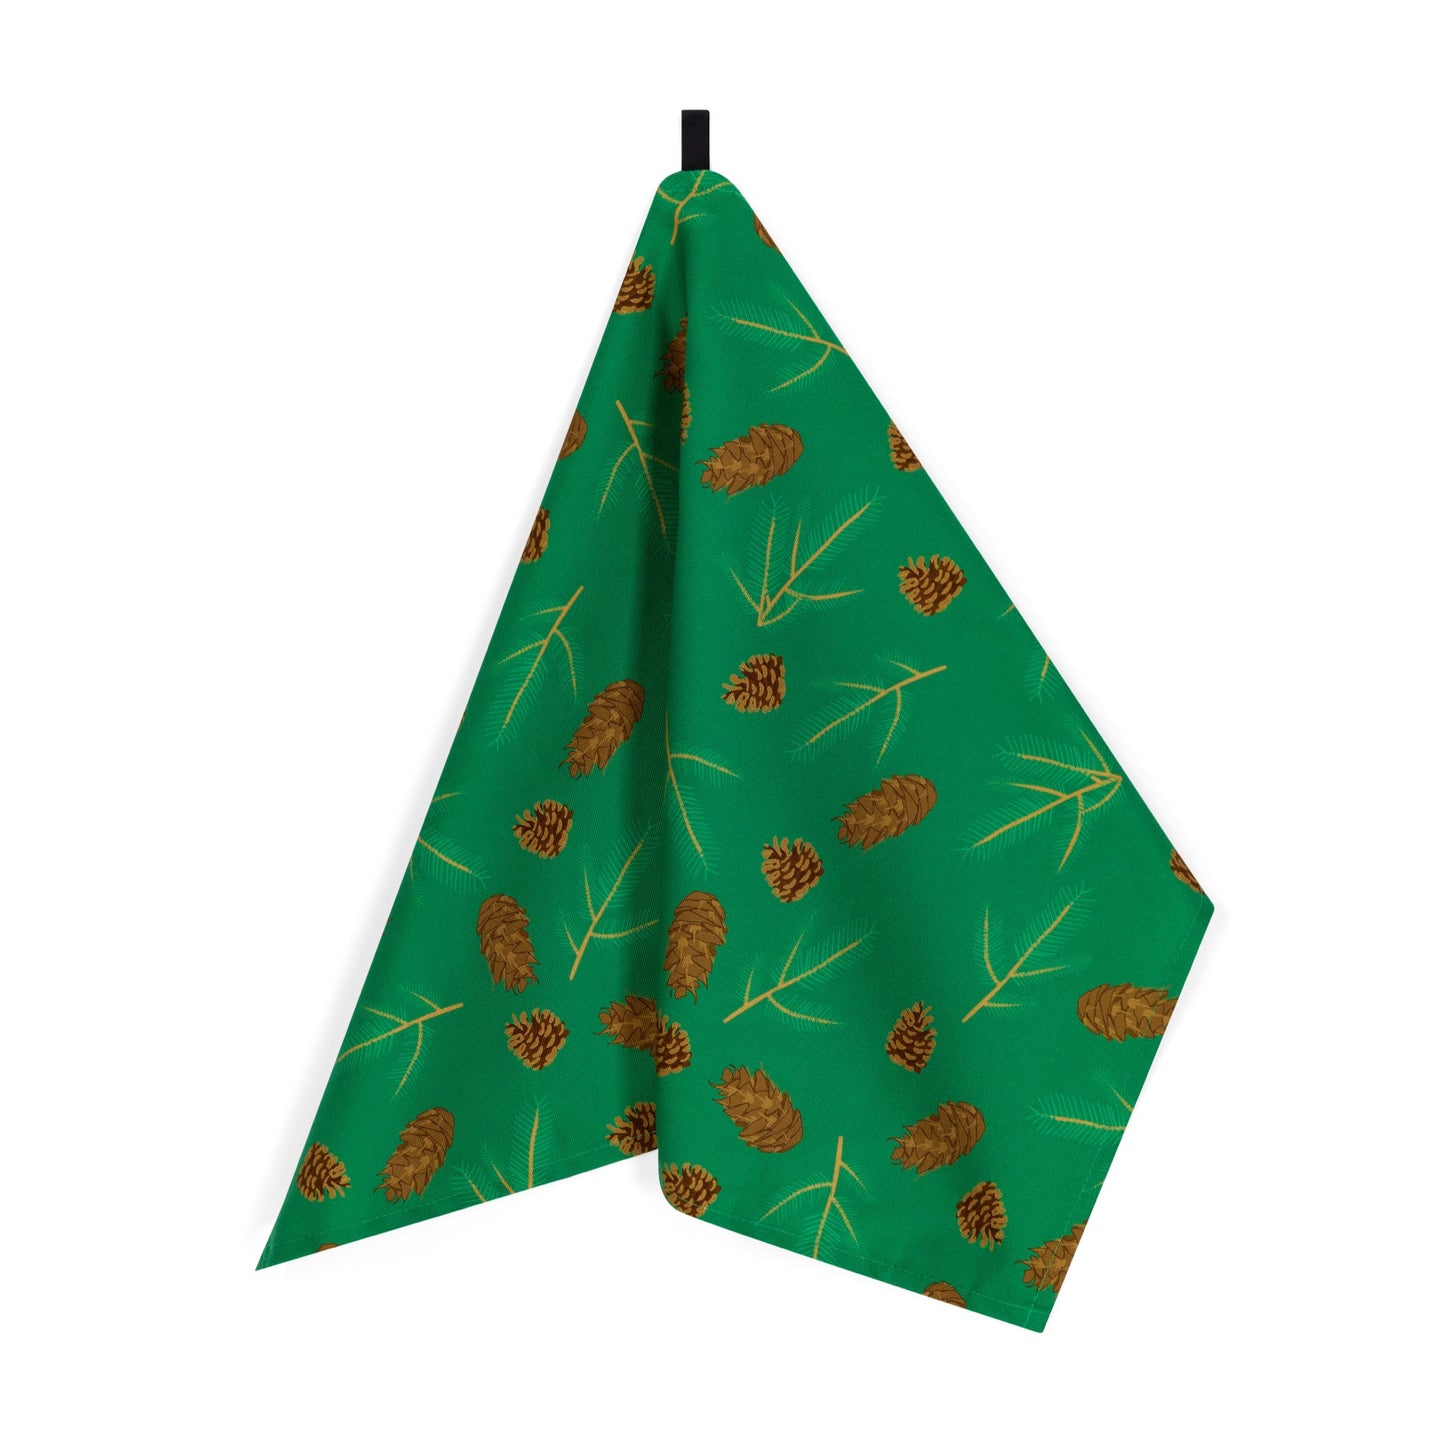 Green Organic Cotton Tea Towel with illustrated Douglas fir cones and spruce sprigs